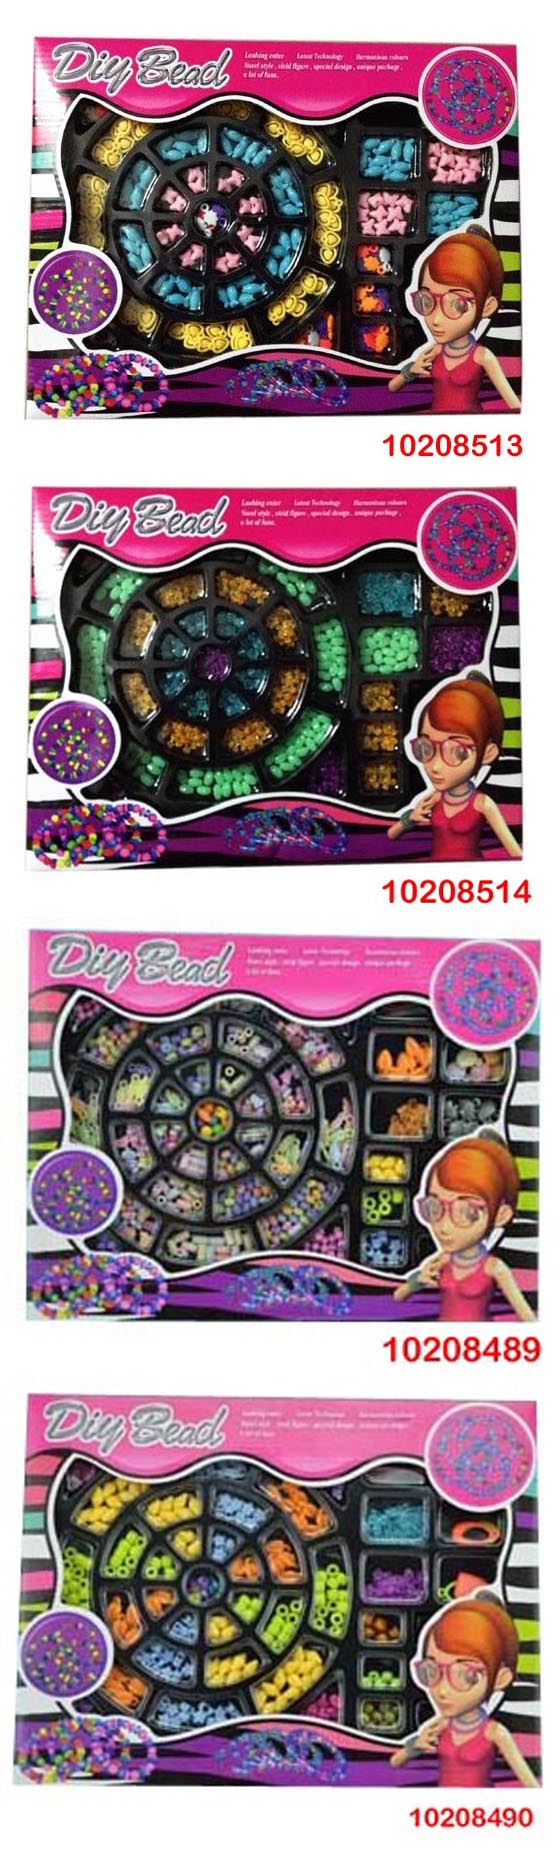 Promotion Education Plastic DIY Craft Toys Beads Set for Girl (10208490)